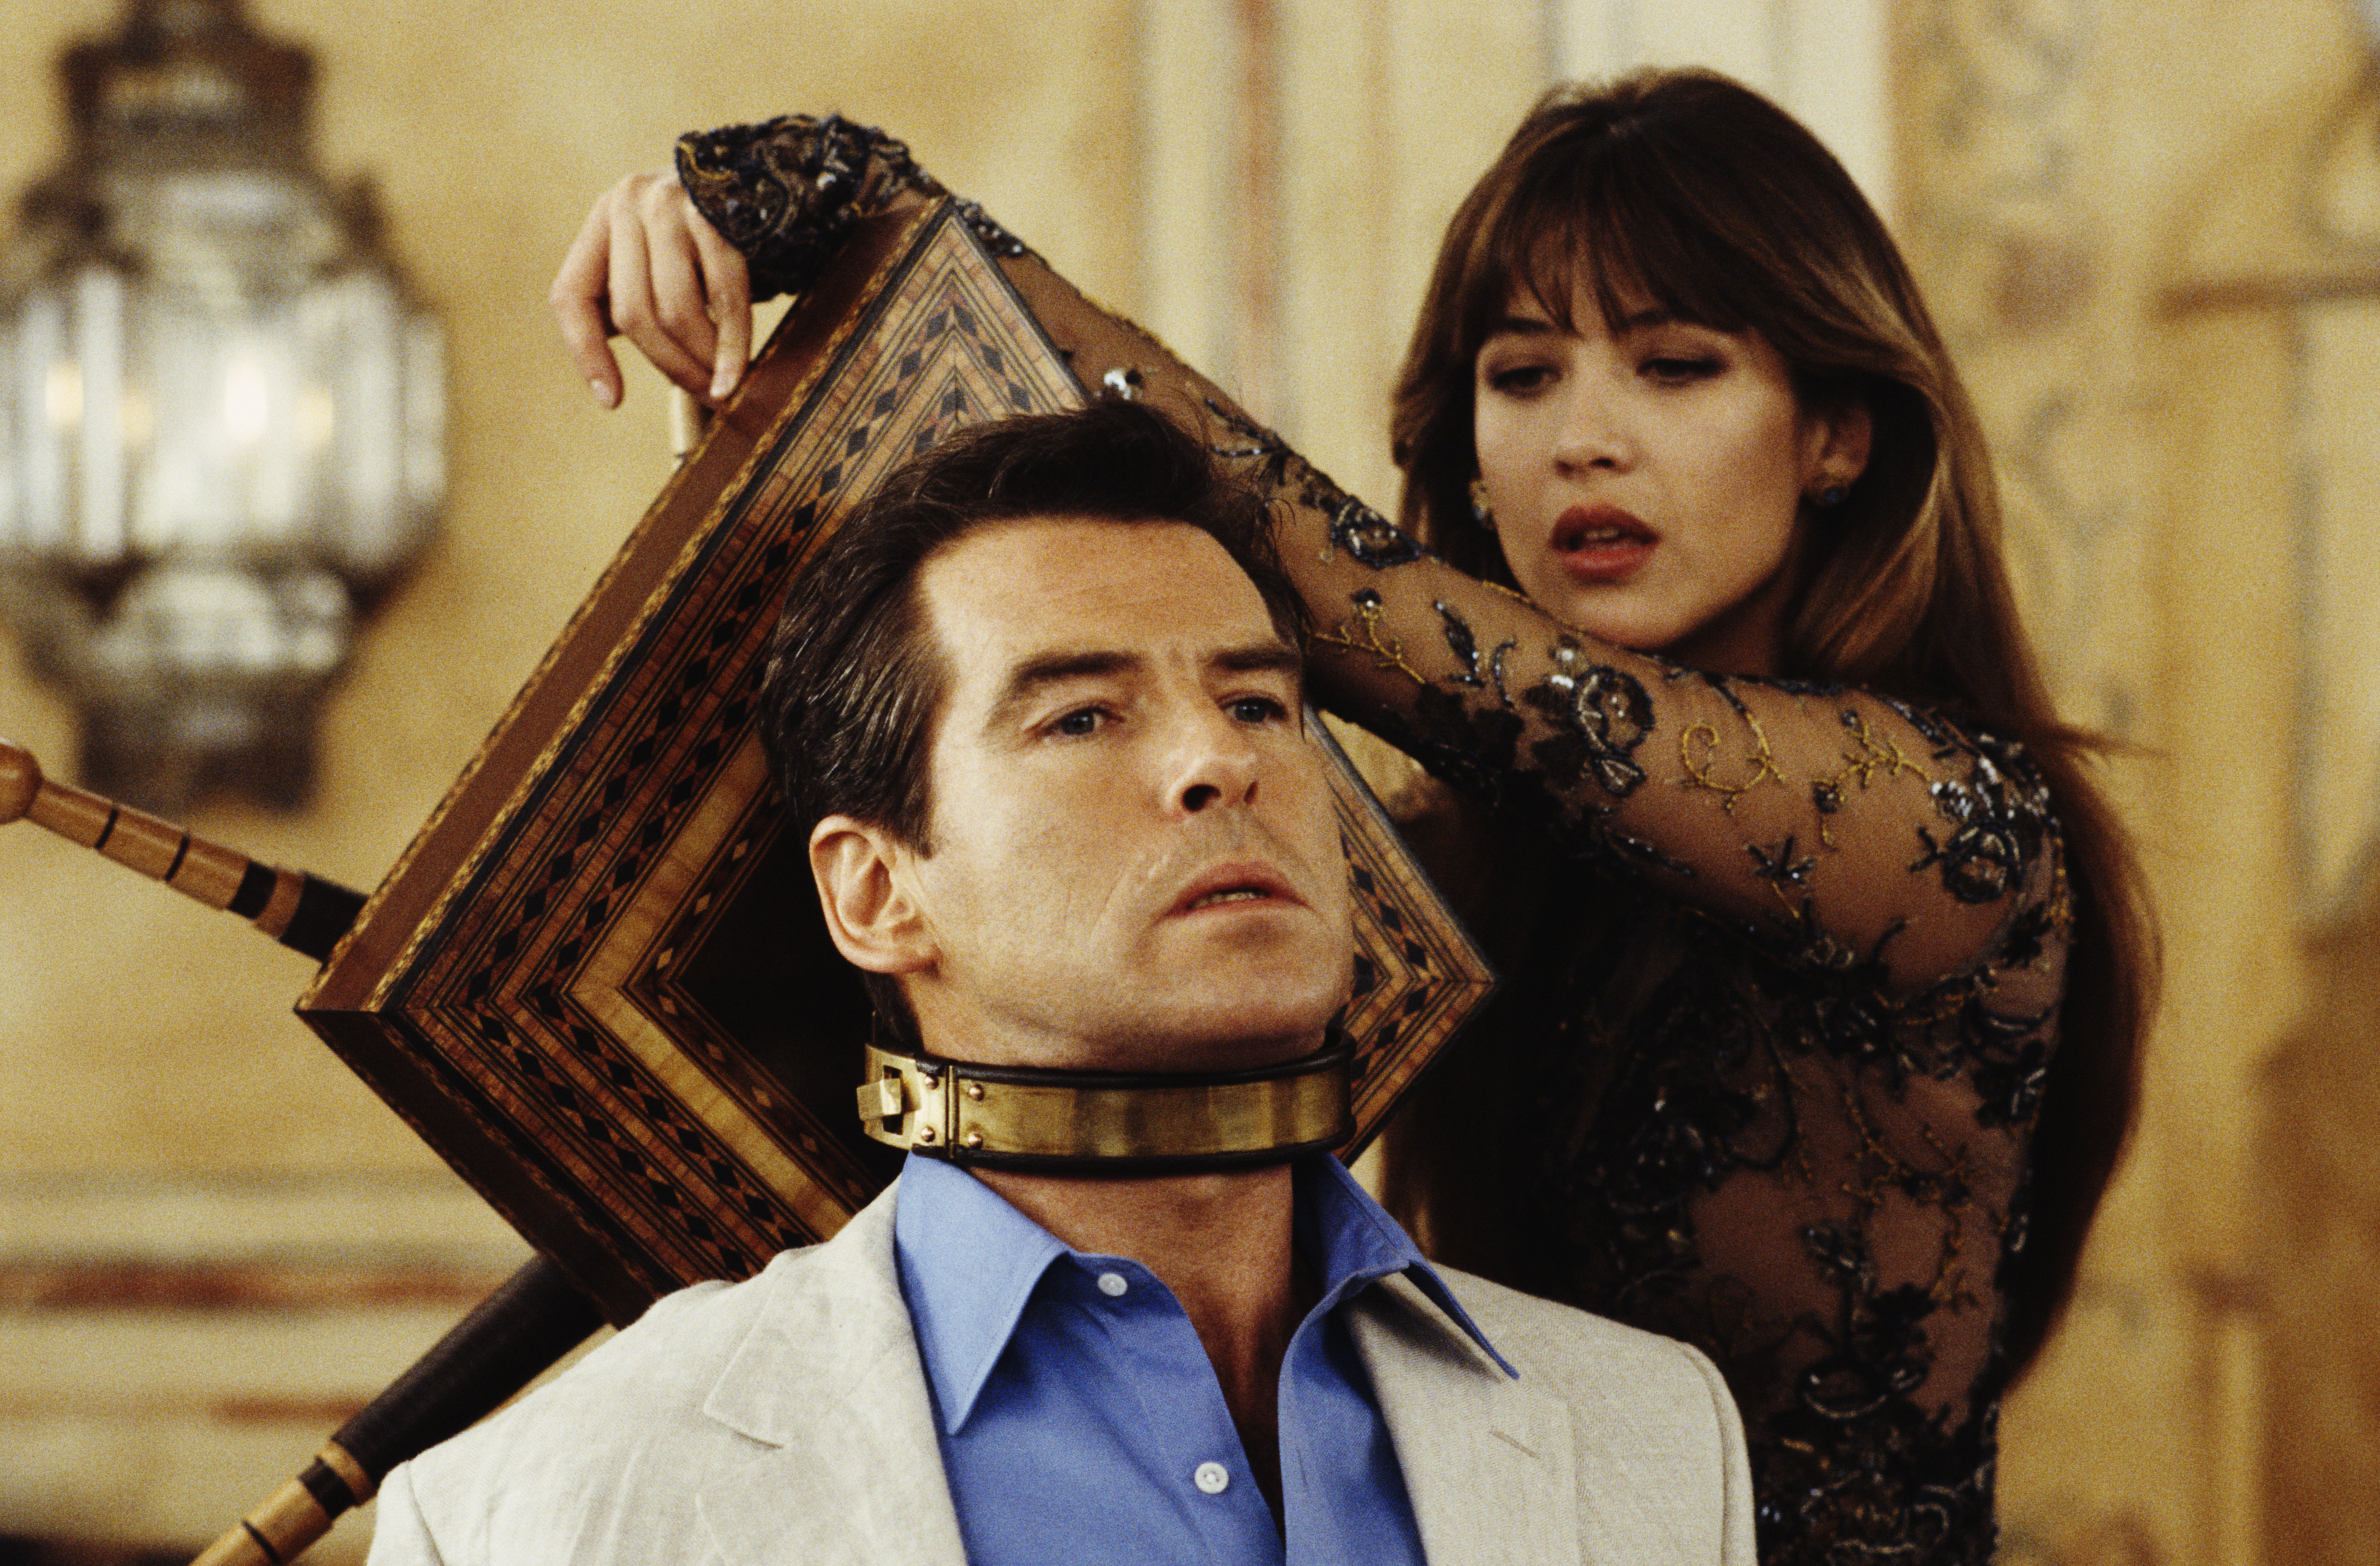 Pierce Brosnan Sophie Marceau "The World Is Not Enough," 1999 | Source: Getty Images